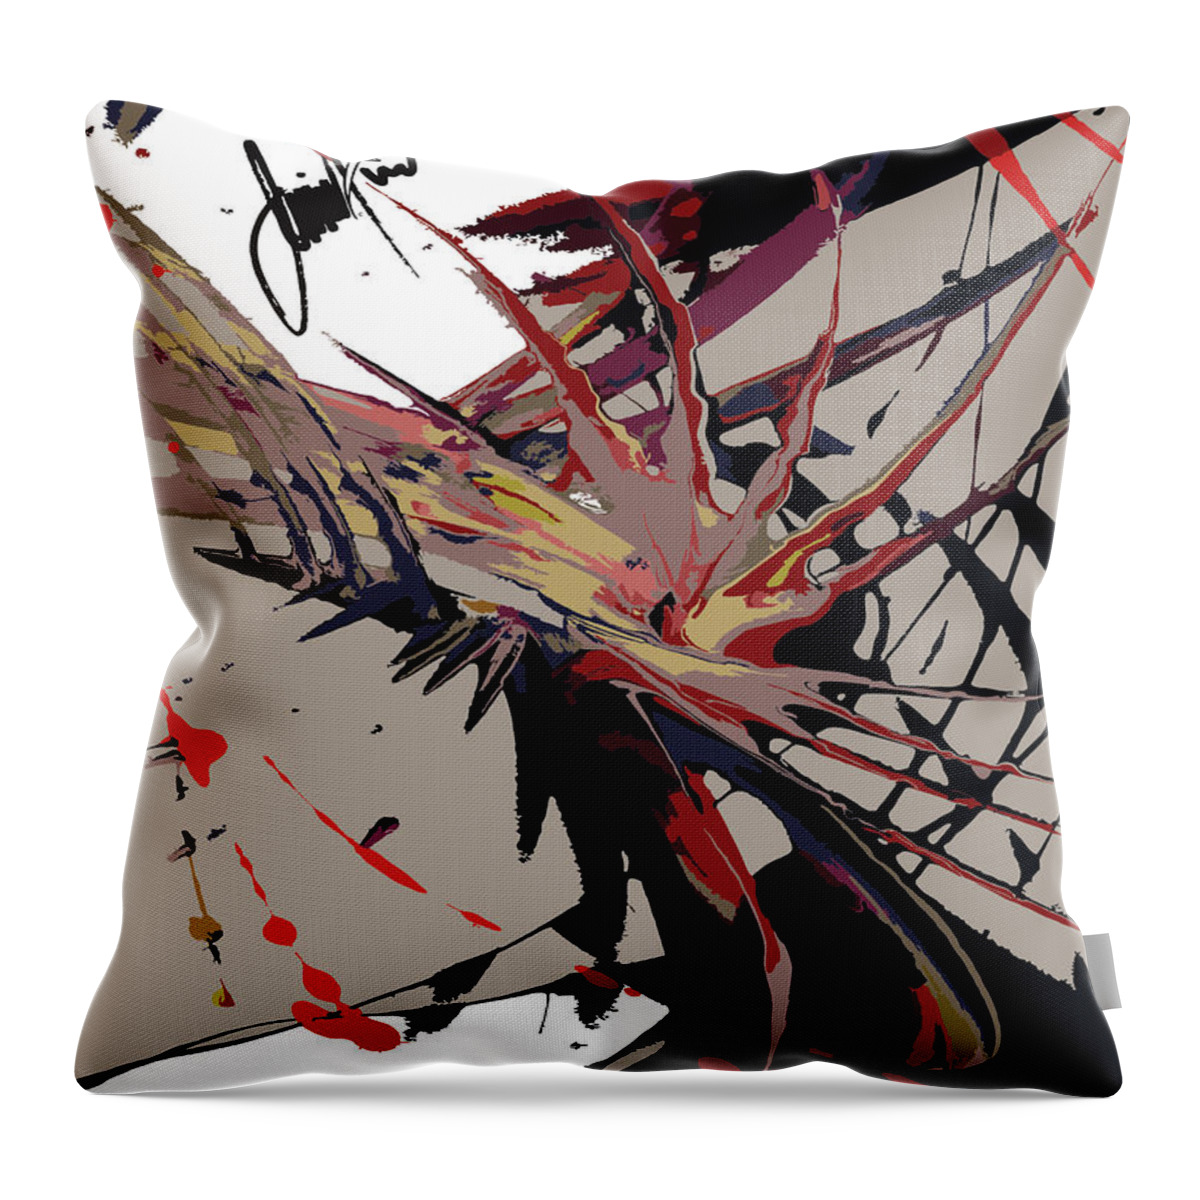  Throw Pillow featuring the digital art Just Do It by Jimmy Williams